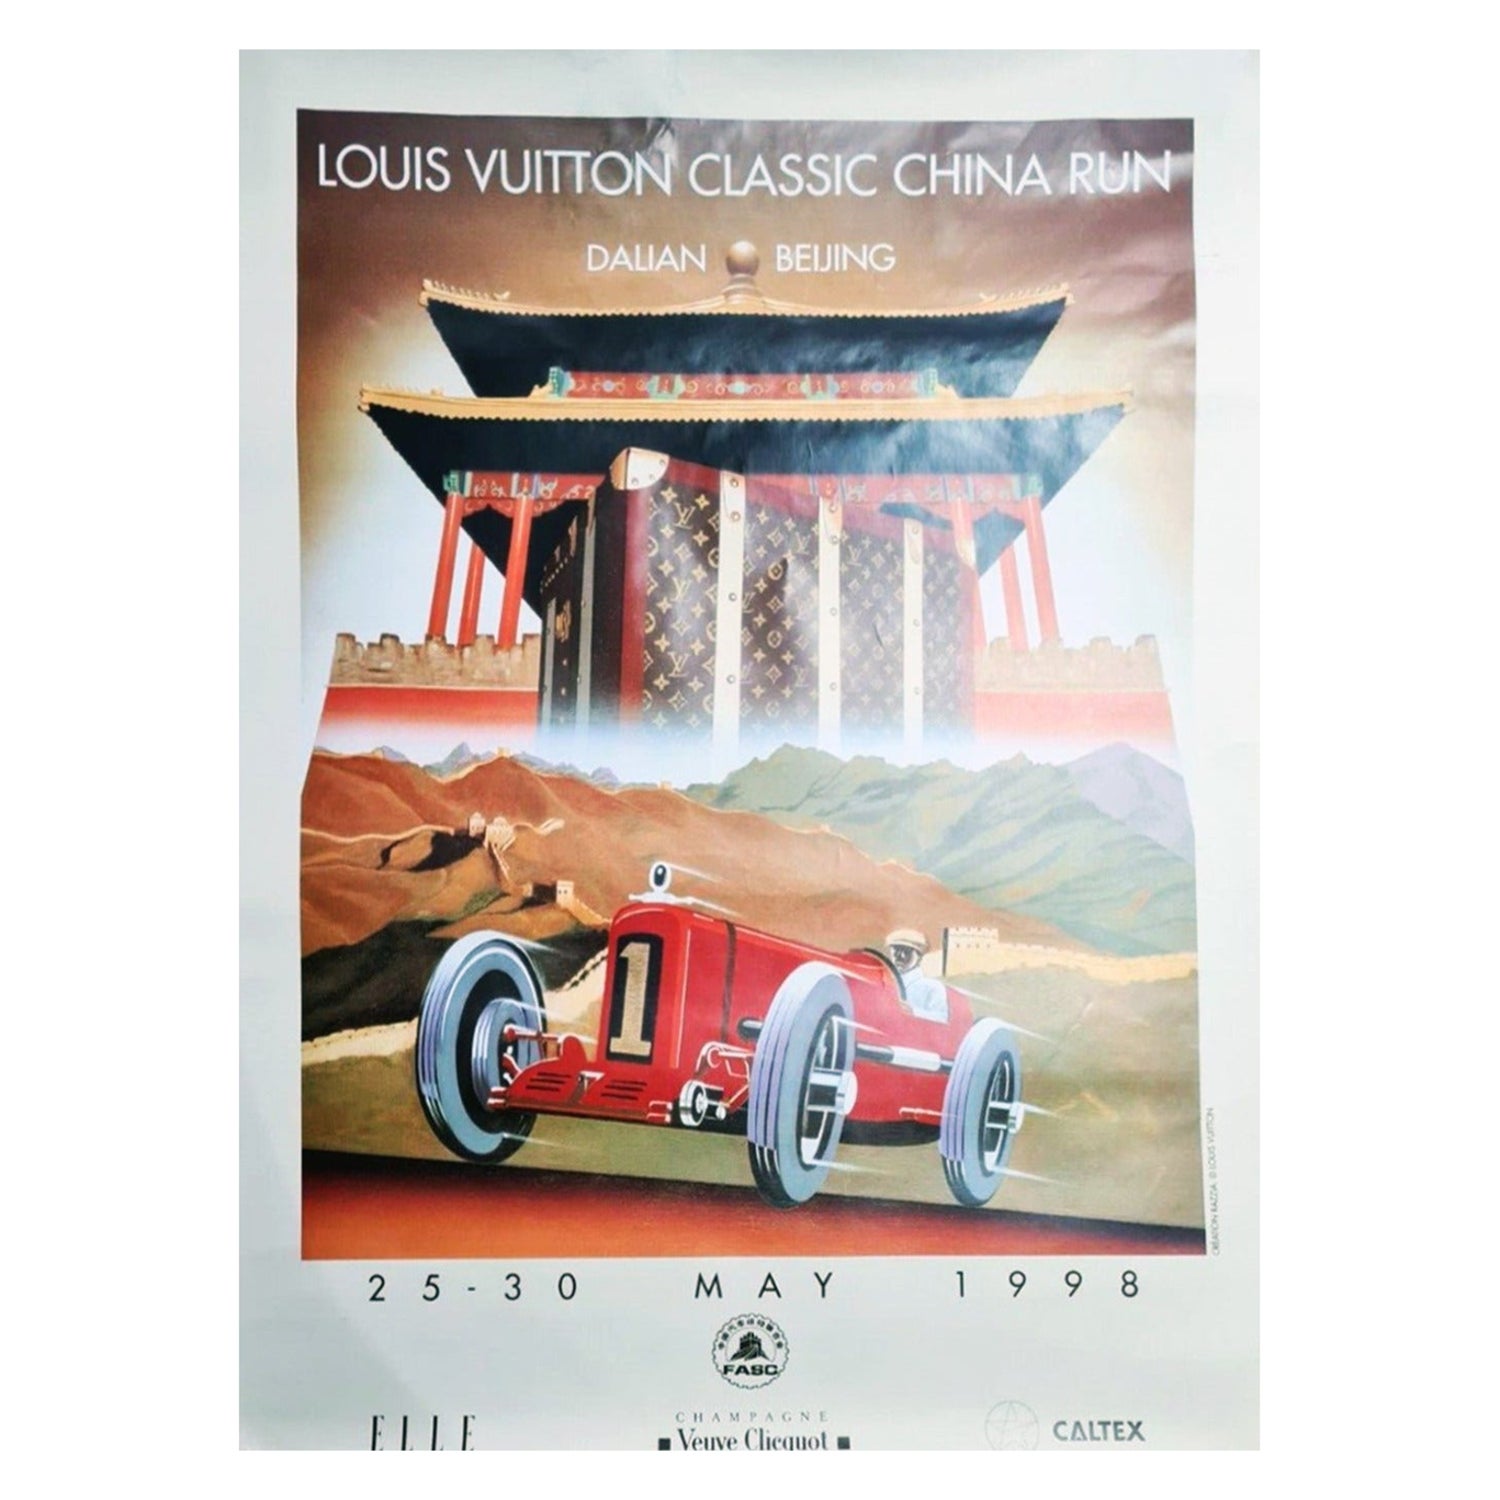 Sold at Auction: VINTAGE ADVERTISING POSTER BY RAZZIA 1986 - LOUIS